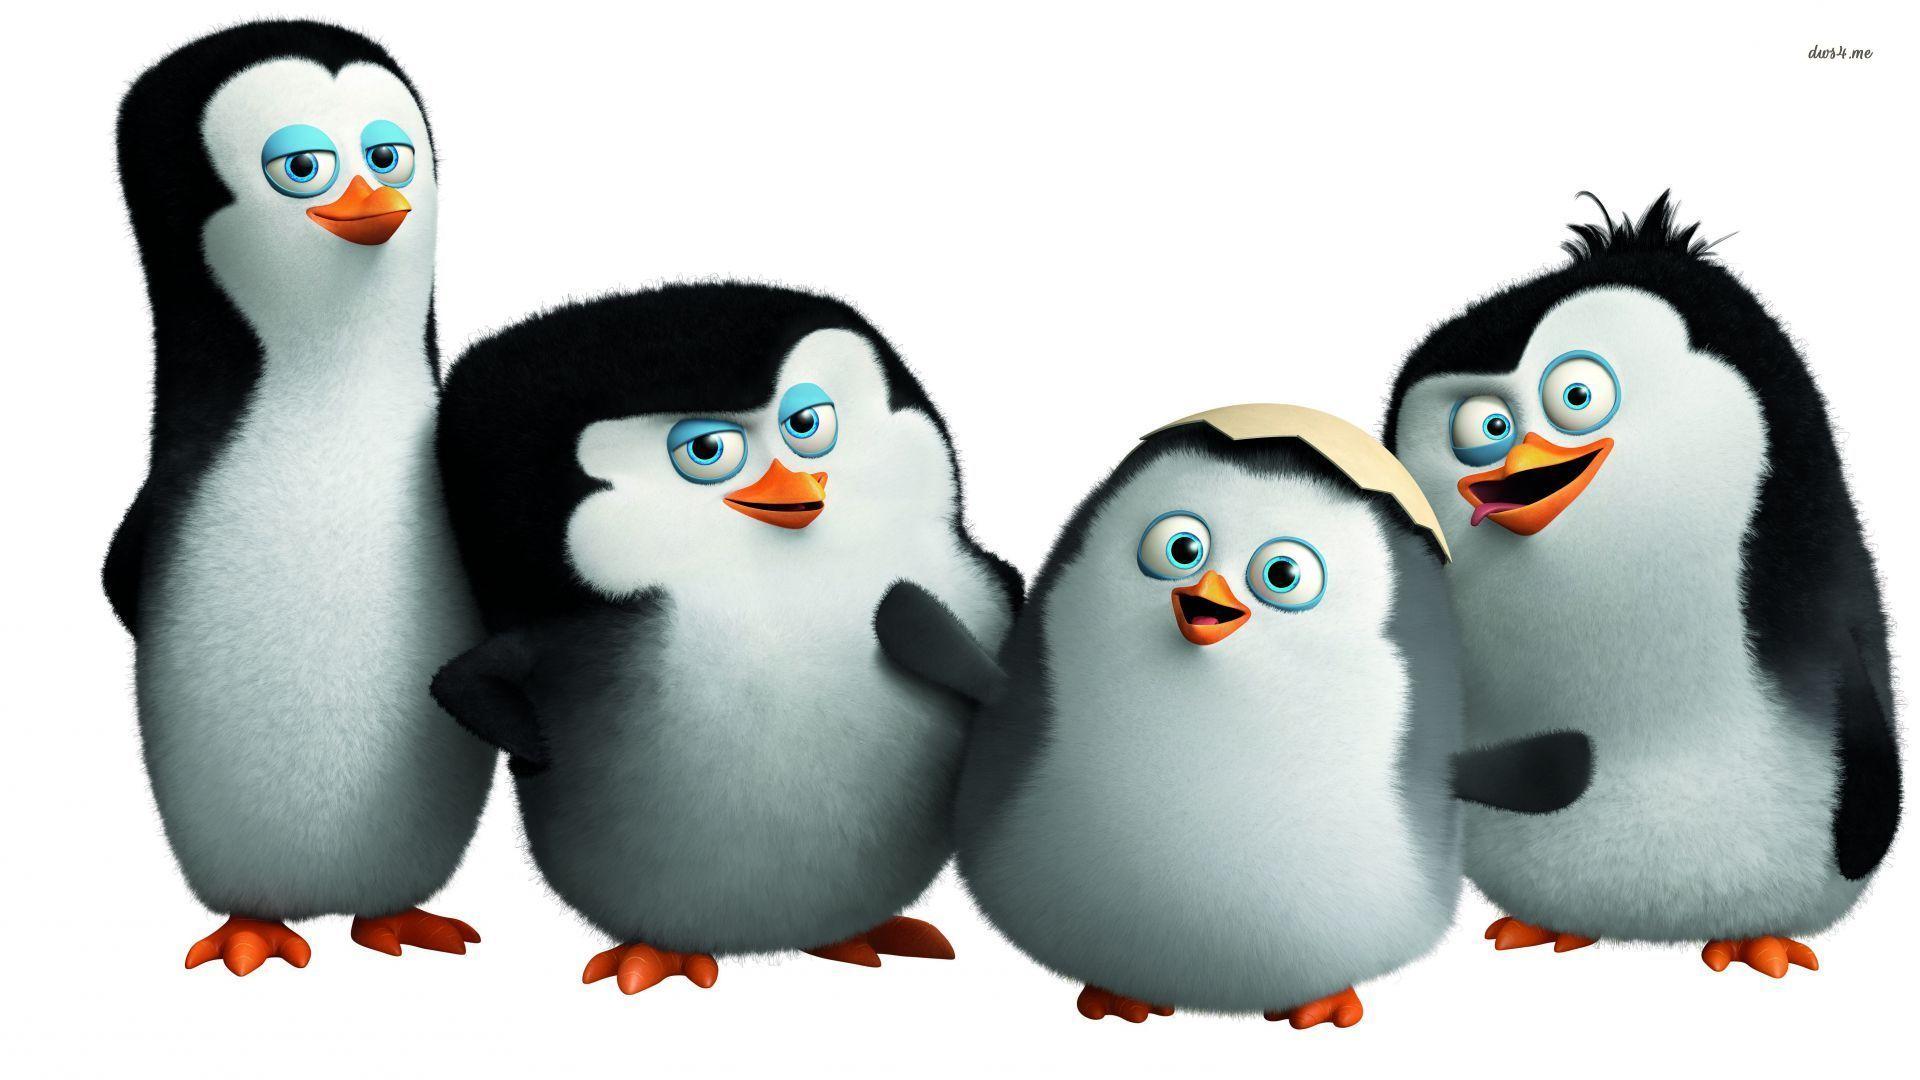 Small penguins in Penguins of Madagascar wallpaper